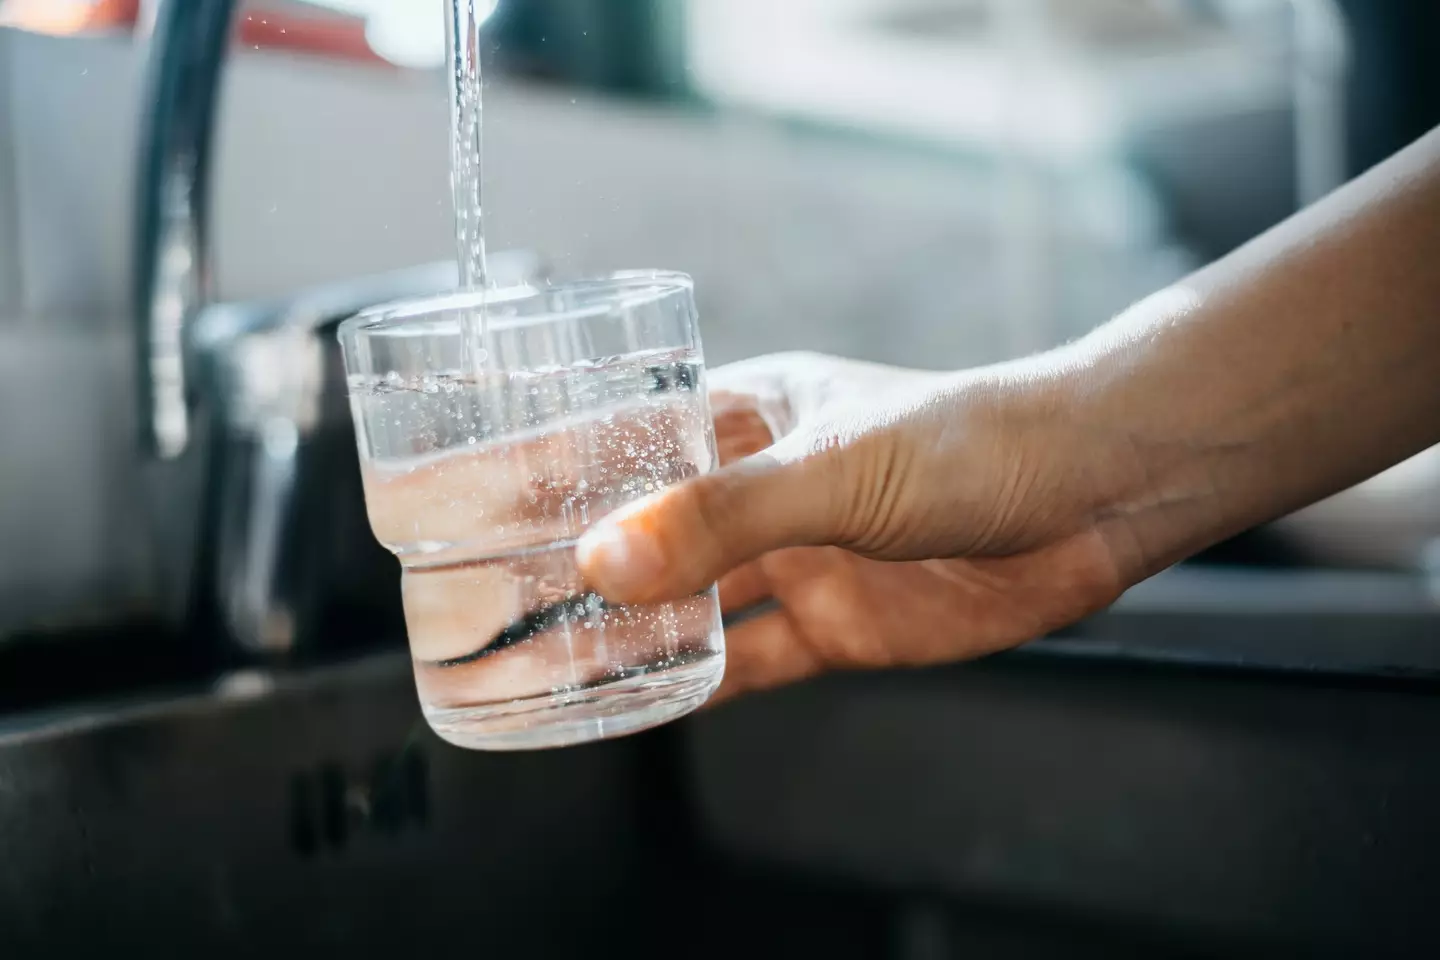 Boil your tap water to remove microplastics, the researchers say.